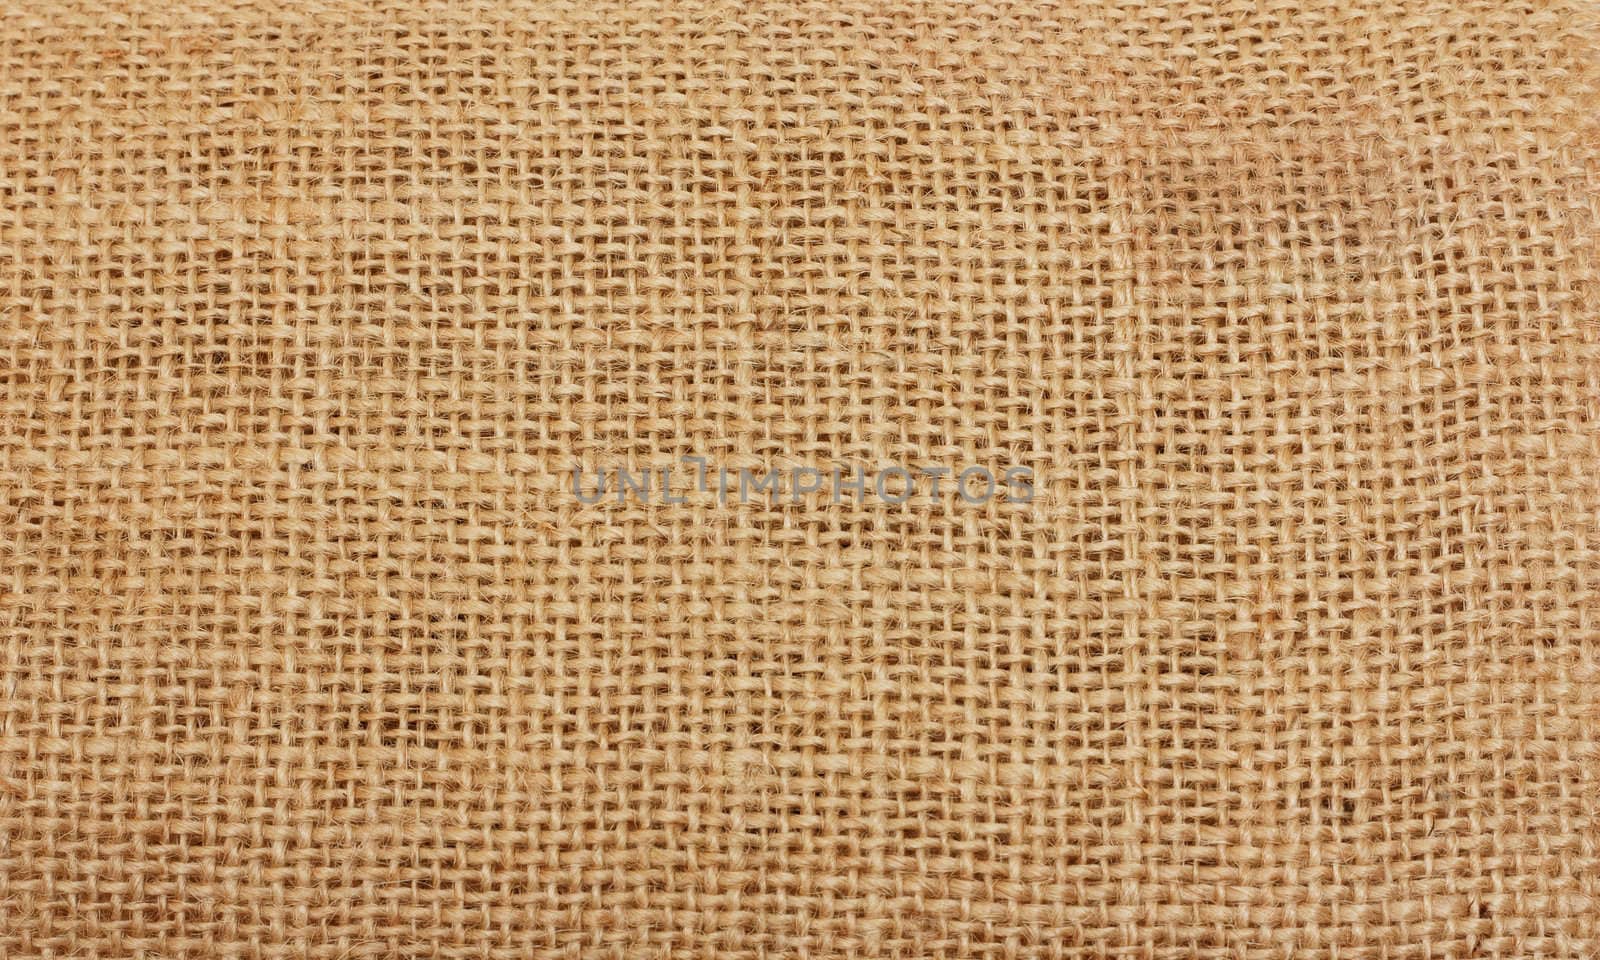 Flax canvas background. Close-up. Detailed view.